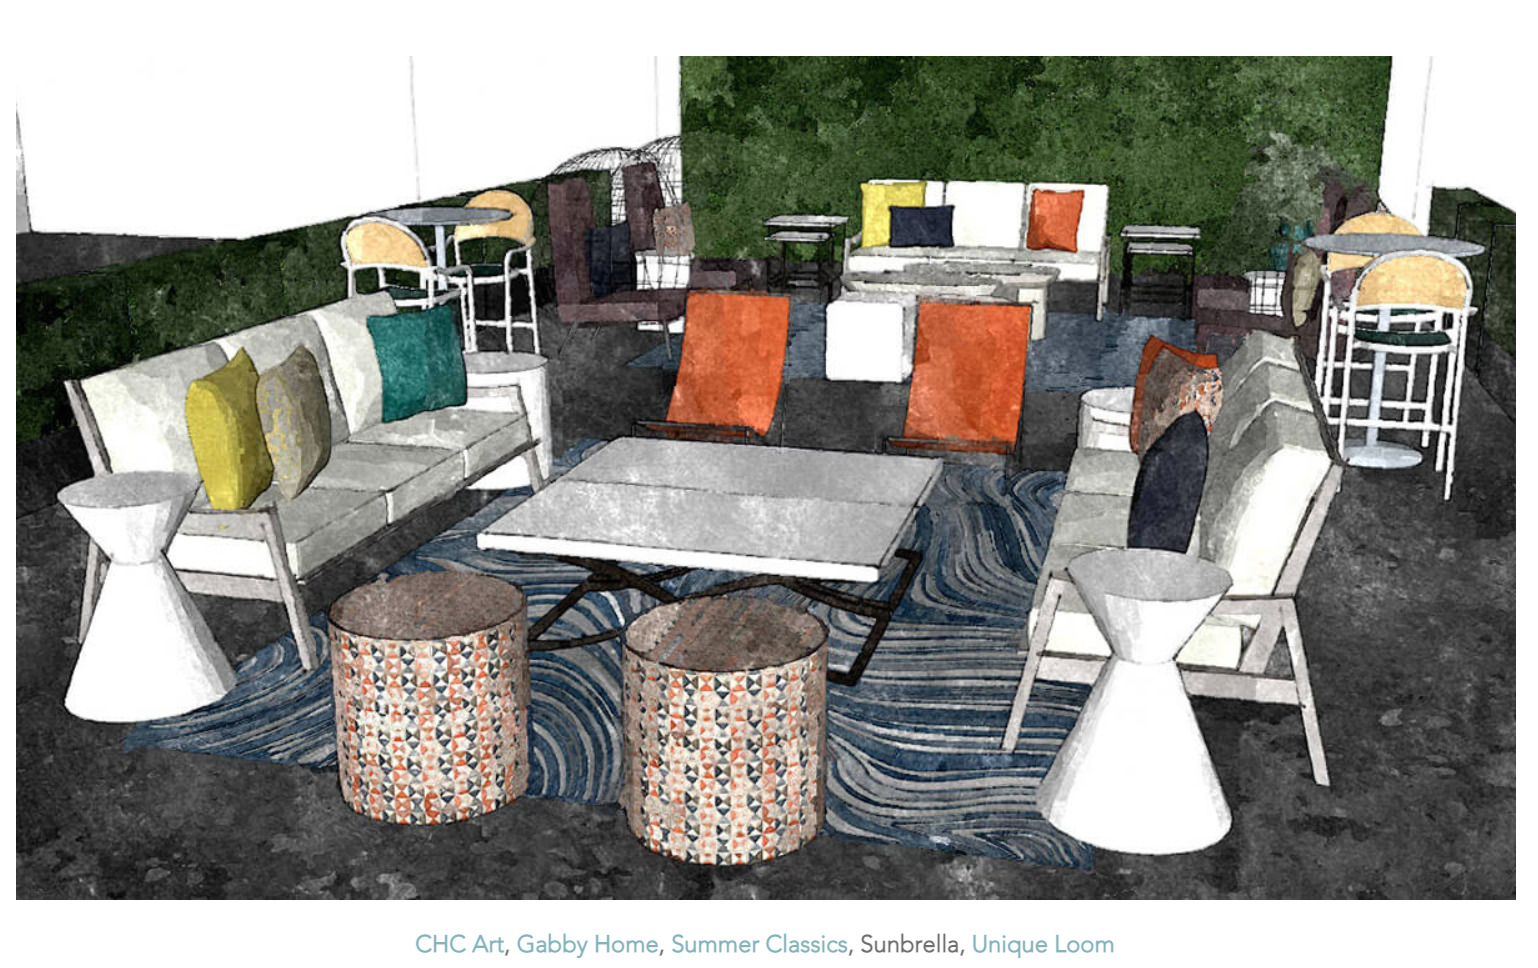 Inspiration for outdoor space layout by Allen & James Interior Design